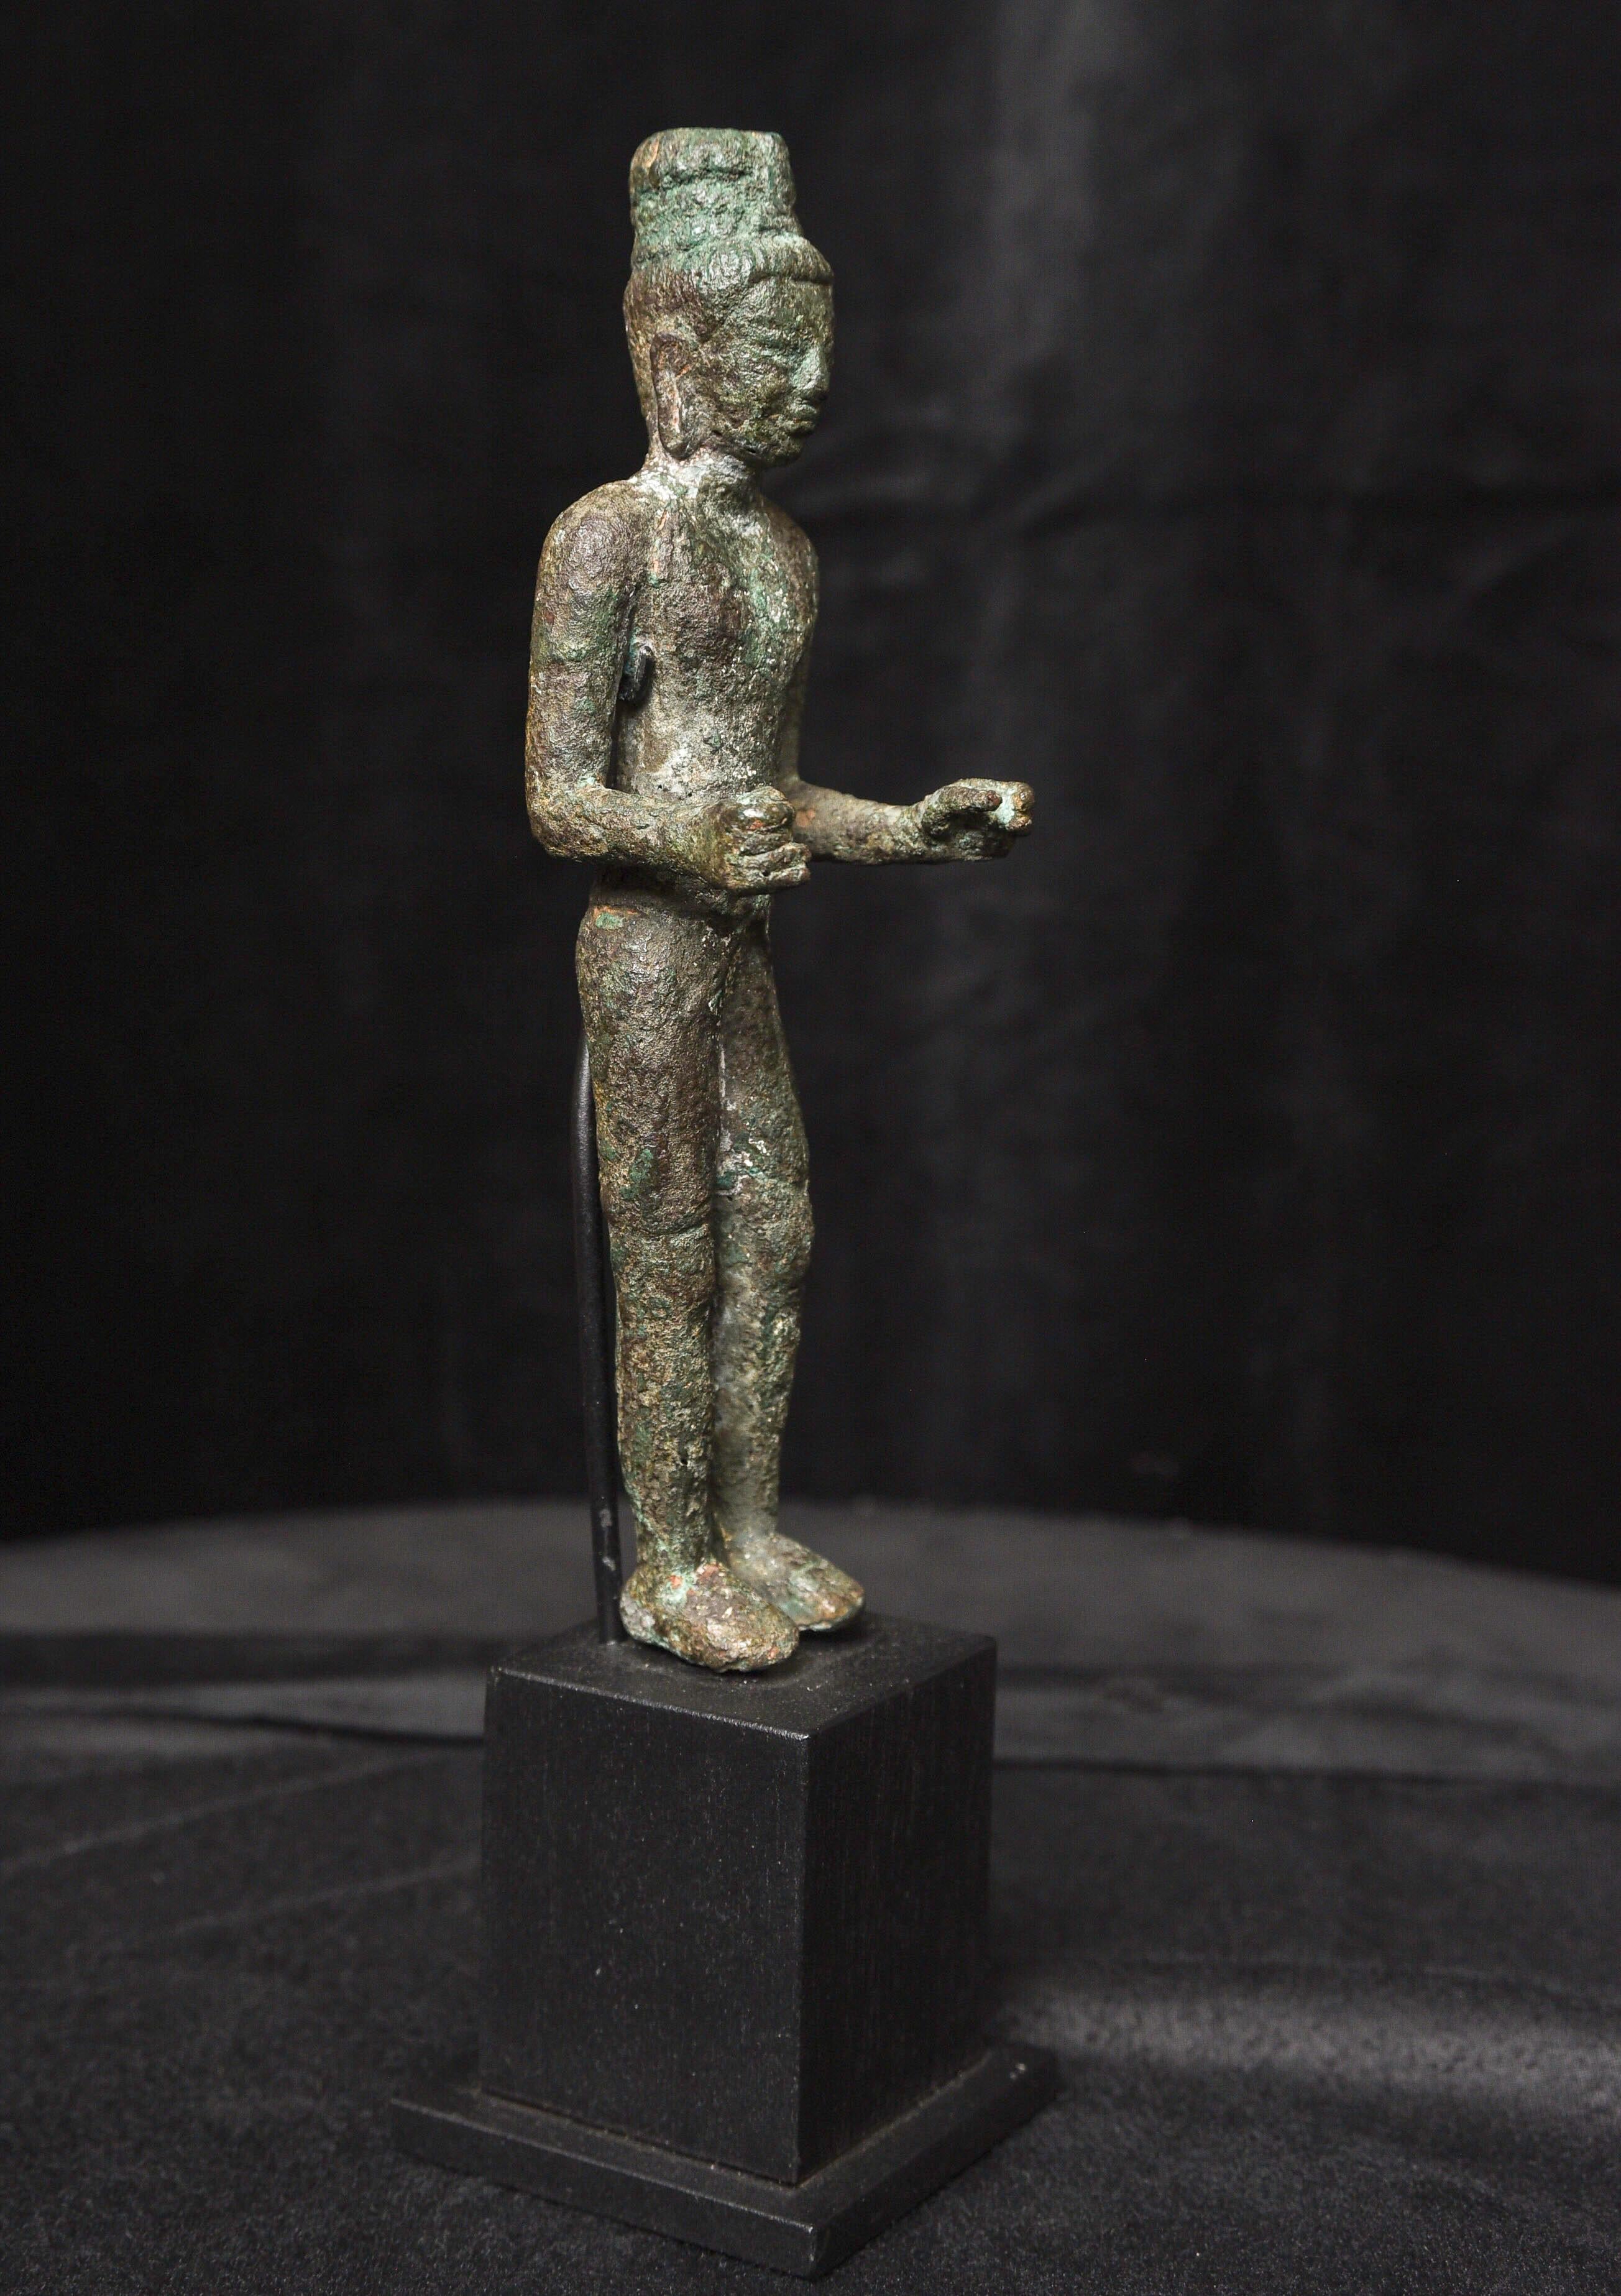 18th Century and Earlier 7th/9thC Solid-Cast Bronze Prakhon Chai Buddha or Bodhisattva - 9688 For Sale